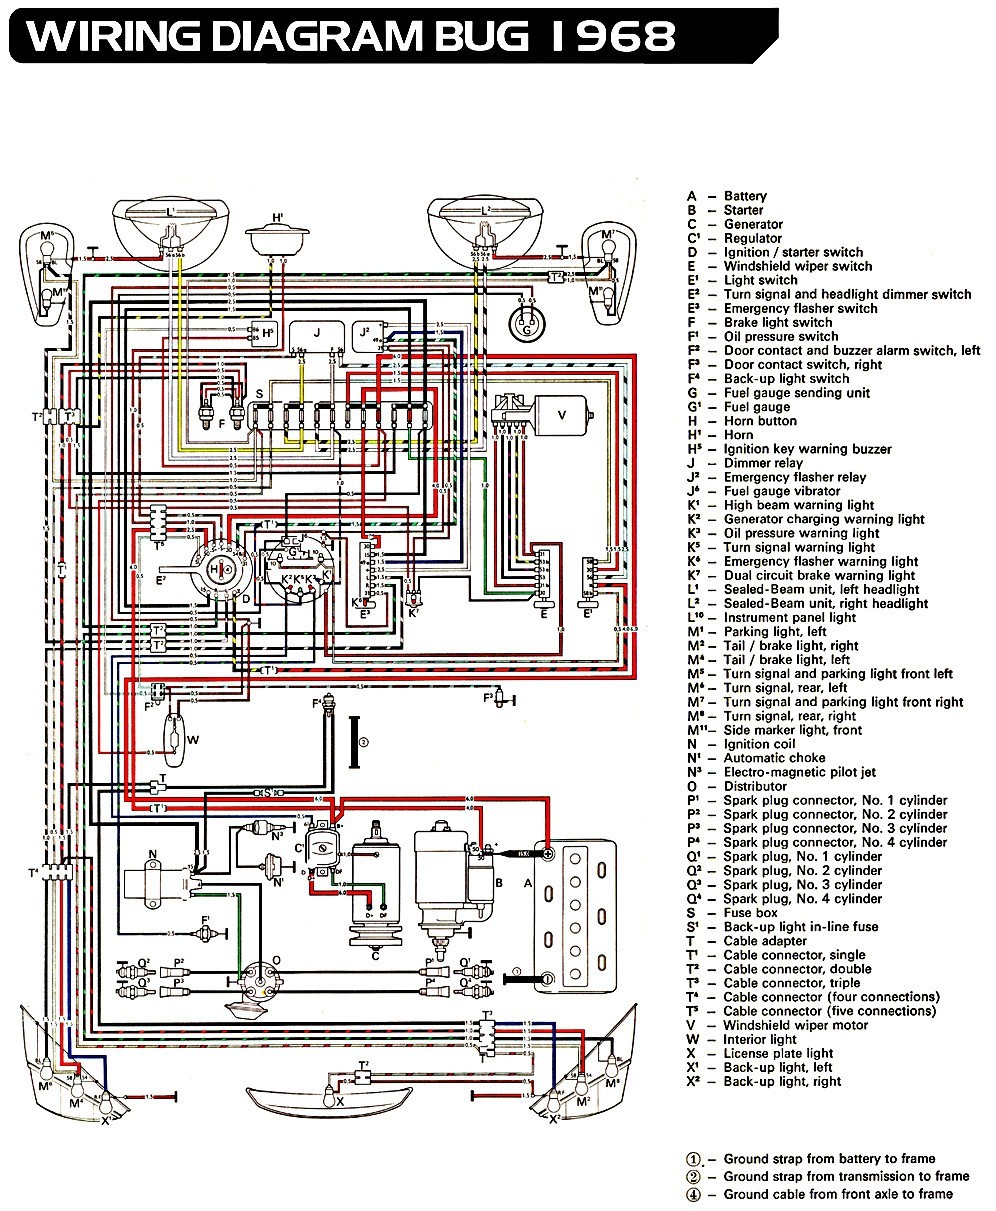 Pictures Of A Vw Beetle Wiring Diagram 1974 Wiring Diagram for A 1974 Vw Beetle Wiring Diagram and Schematic Role Of Pictures Of A Vw Beetle Wiring Diagram 1974